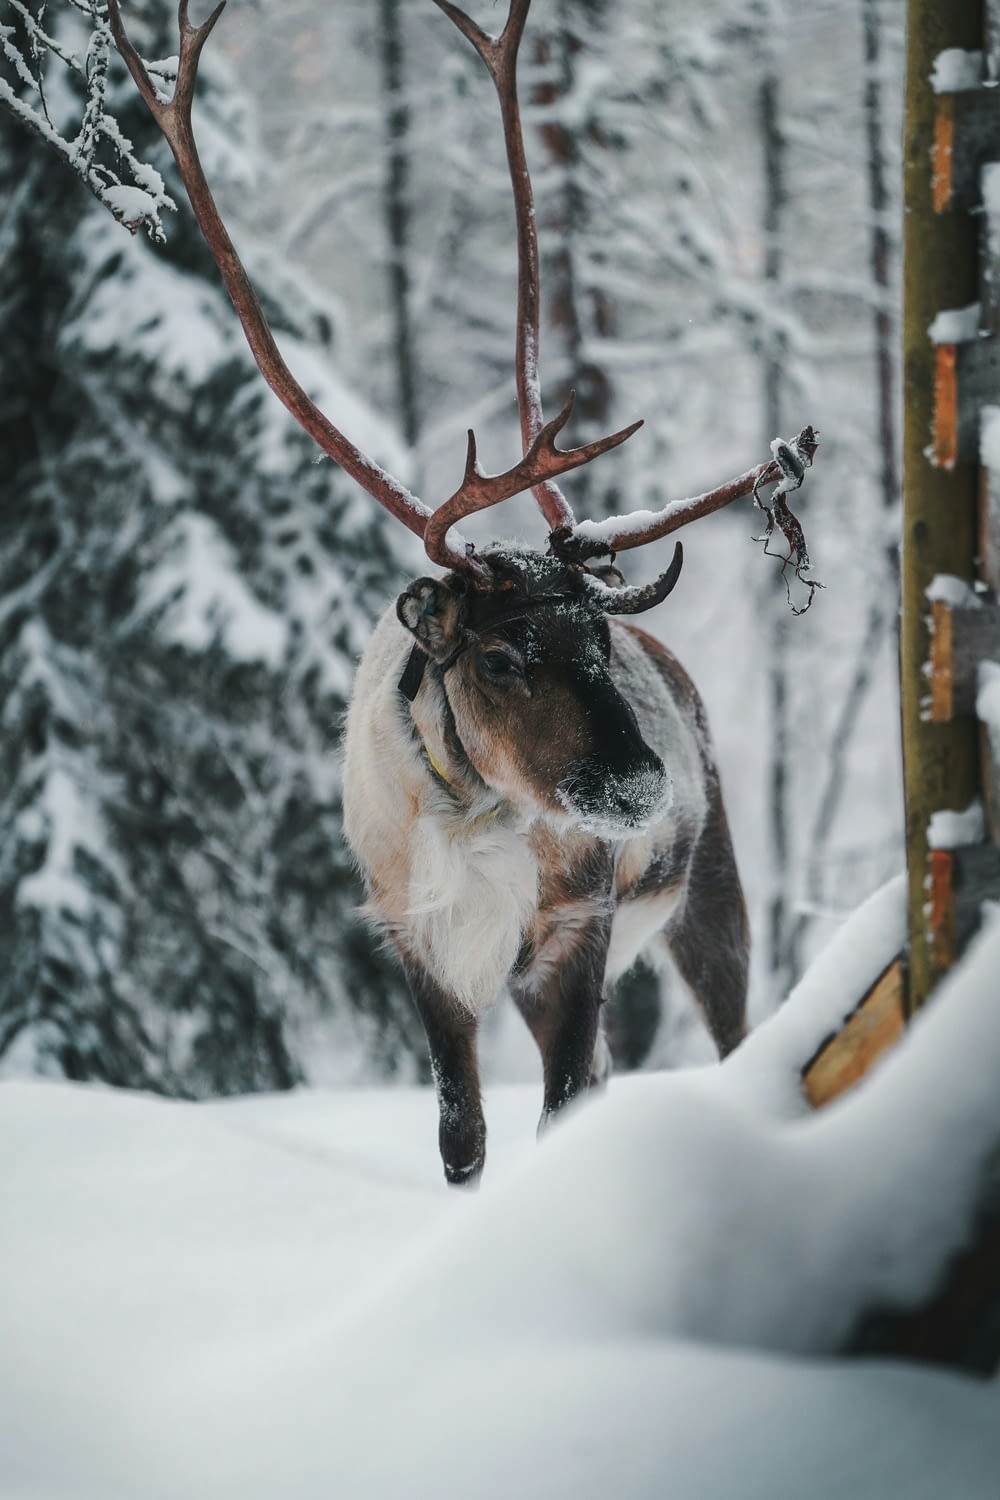 a reindeer with antlers walking through the snow